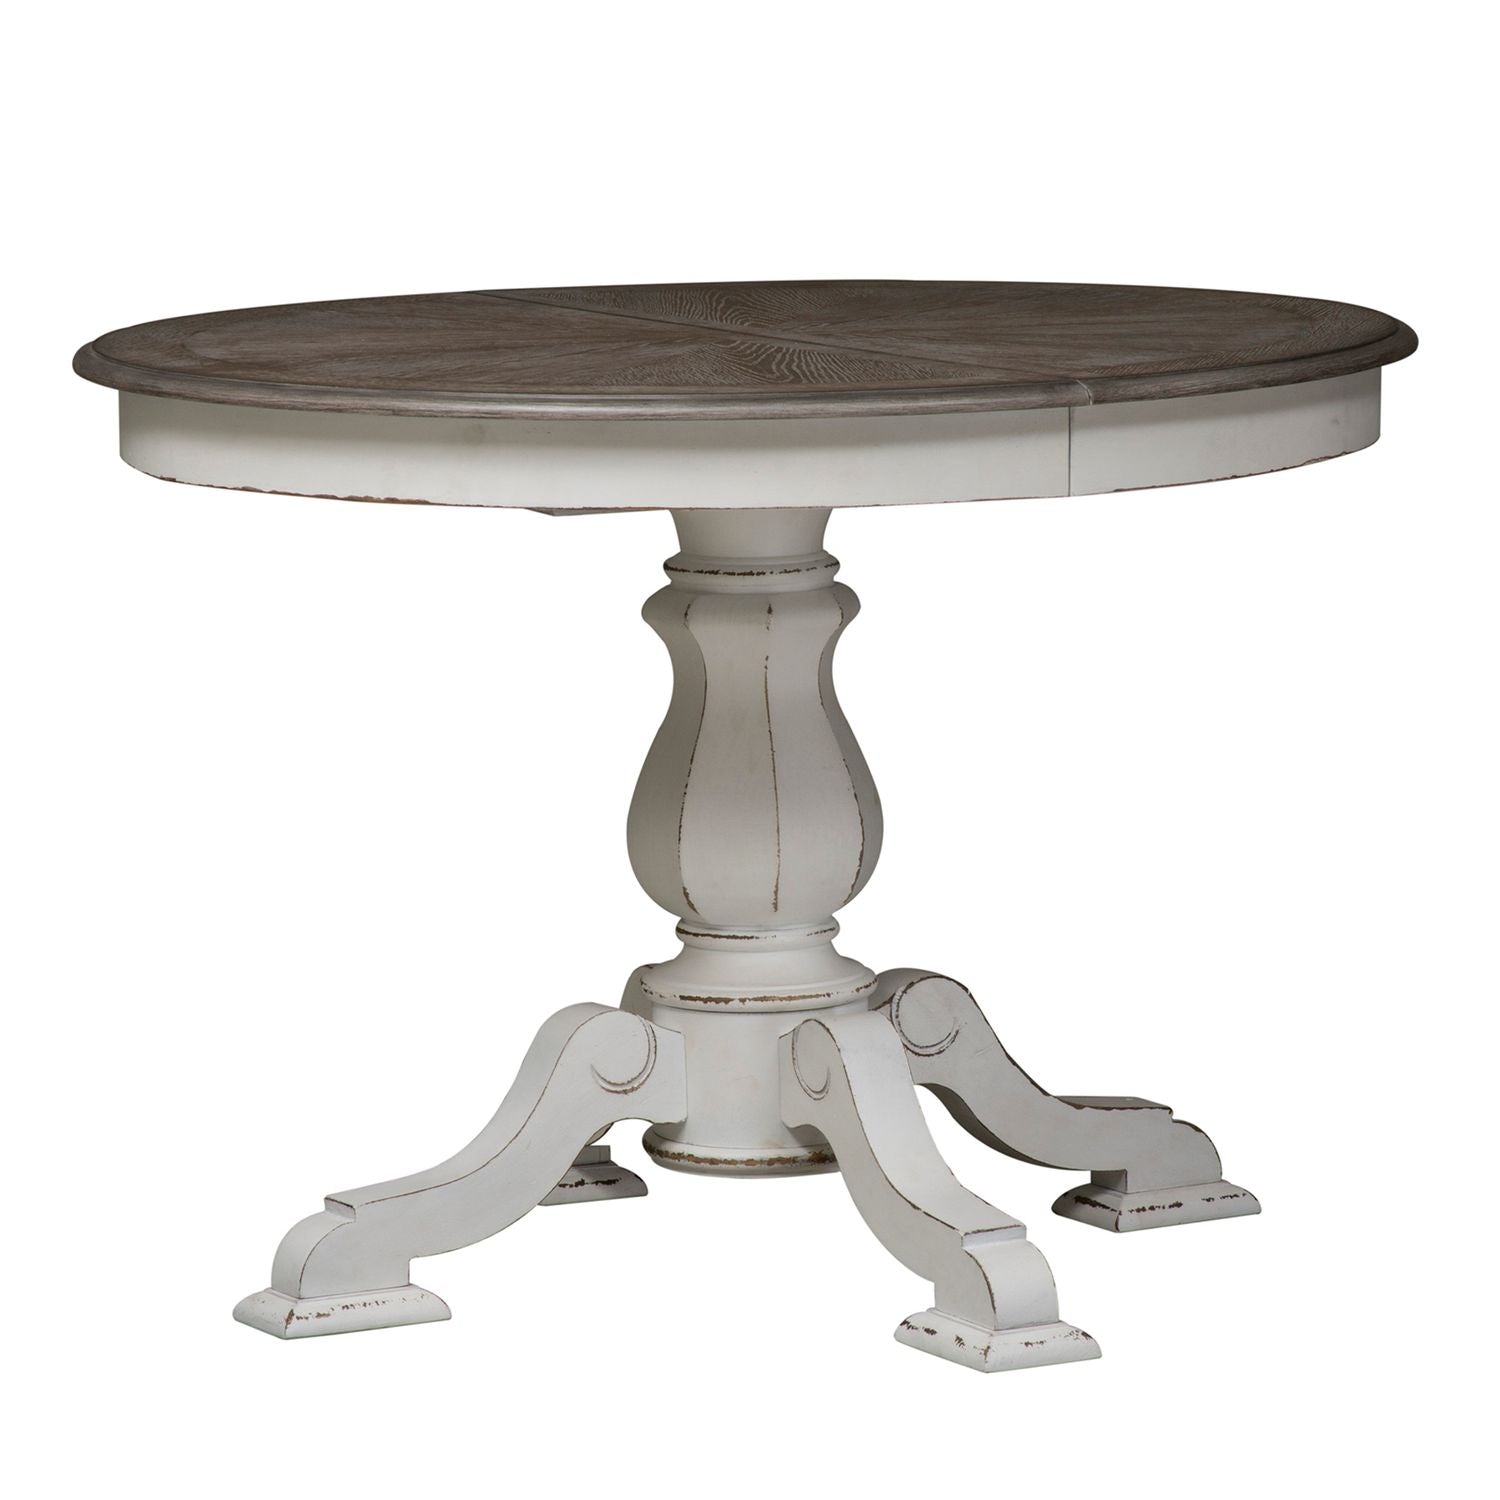 Magnolia Manor / Opt 5 Piece Pedestal Table Set by Liberty Furniture